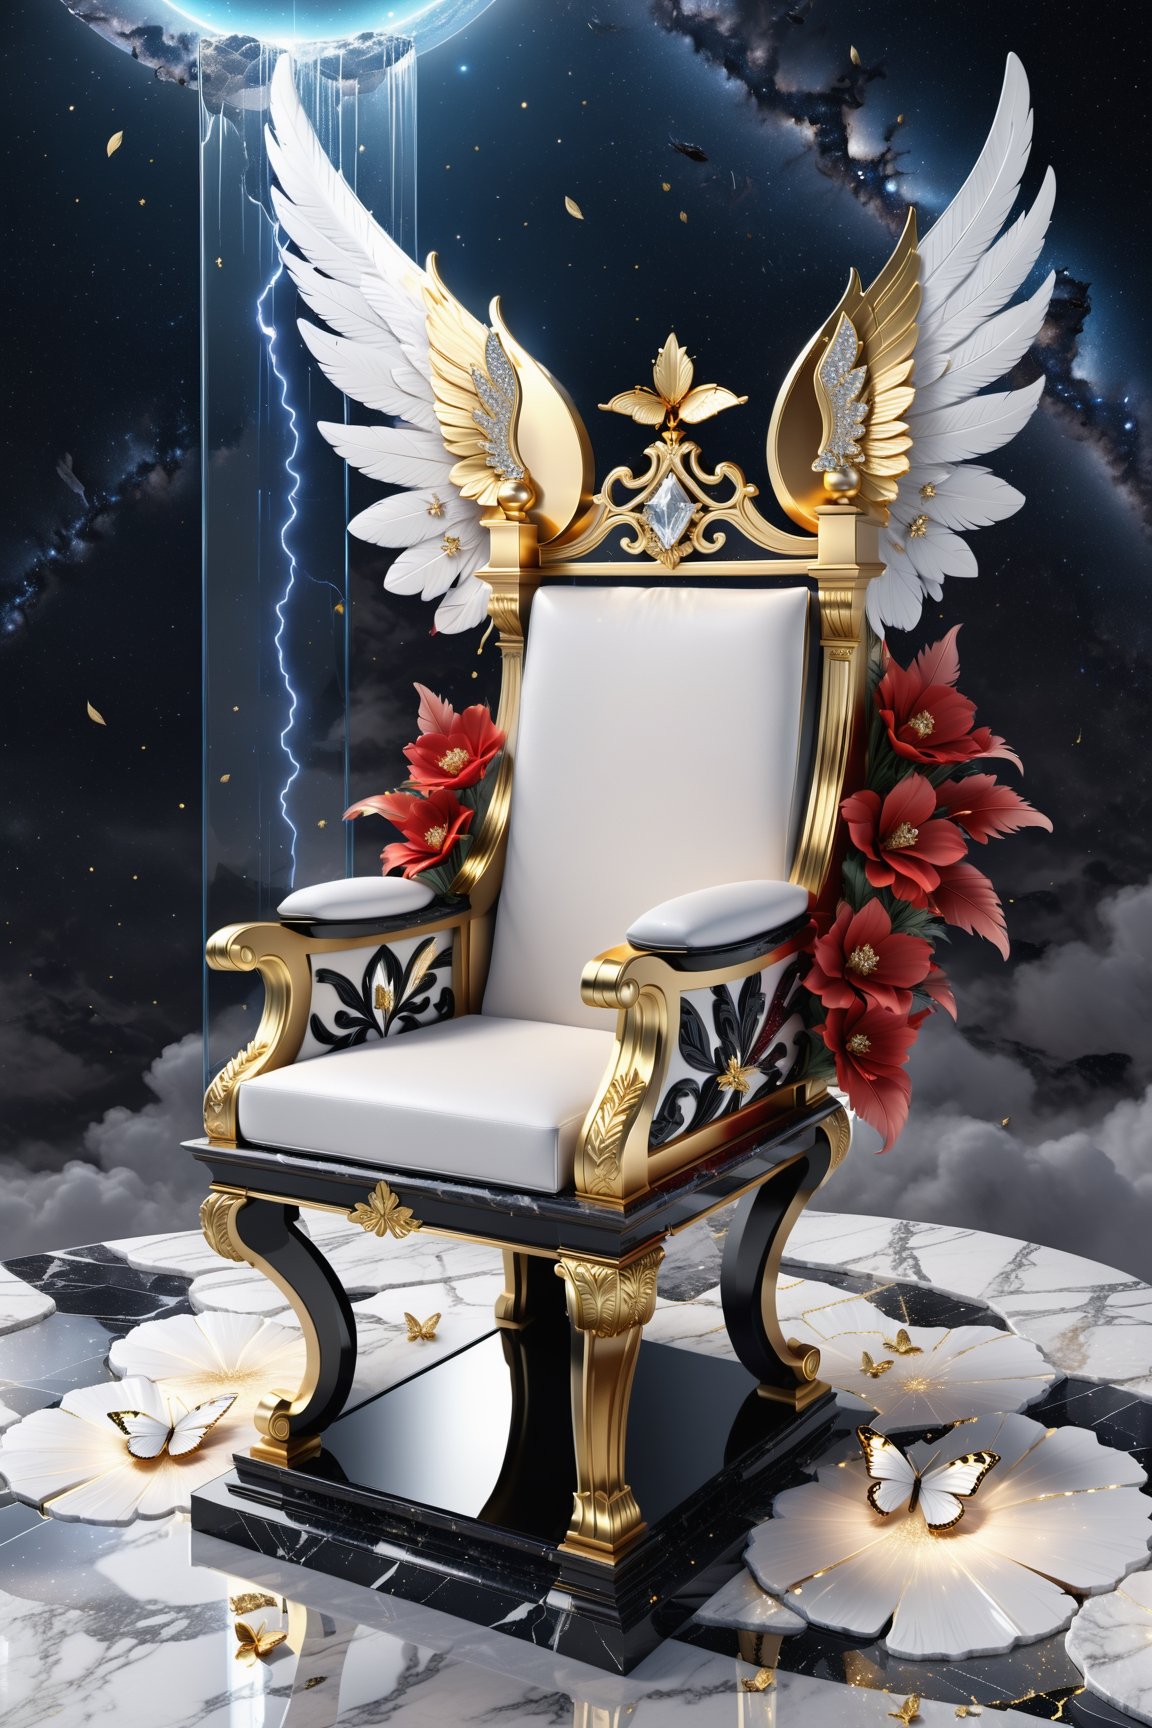 High definition photorealistic render of an incredible and mysterious beautiful and luxurious feminine slipper with intricate gold and white marble details and with wings adorning the design, placed on a luxurious column-style throne in black and white marble with crystal and glass with iridescent details and parametric style, located in a desert night landscape, a sky visible to interstellar space, with asteroids, space matter, galaxies, lightning, rain and stars with flowers, white and red feathers and butterflies, a surreal scene with floating sands
